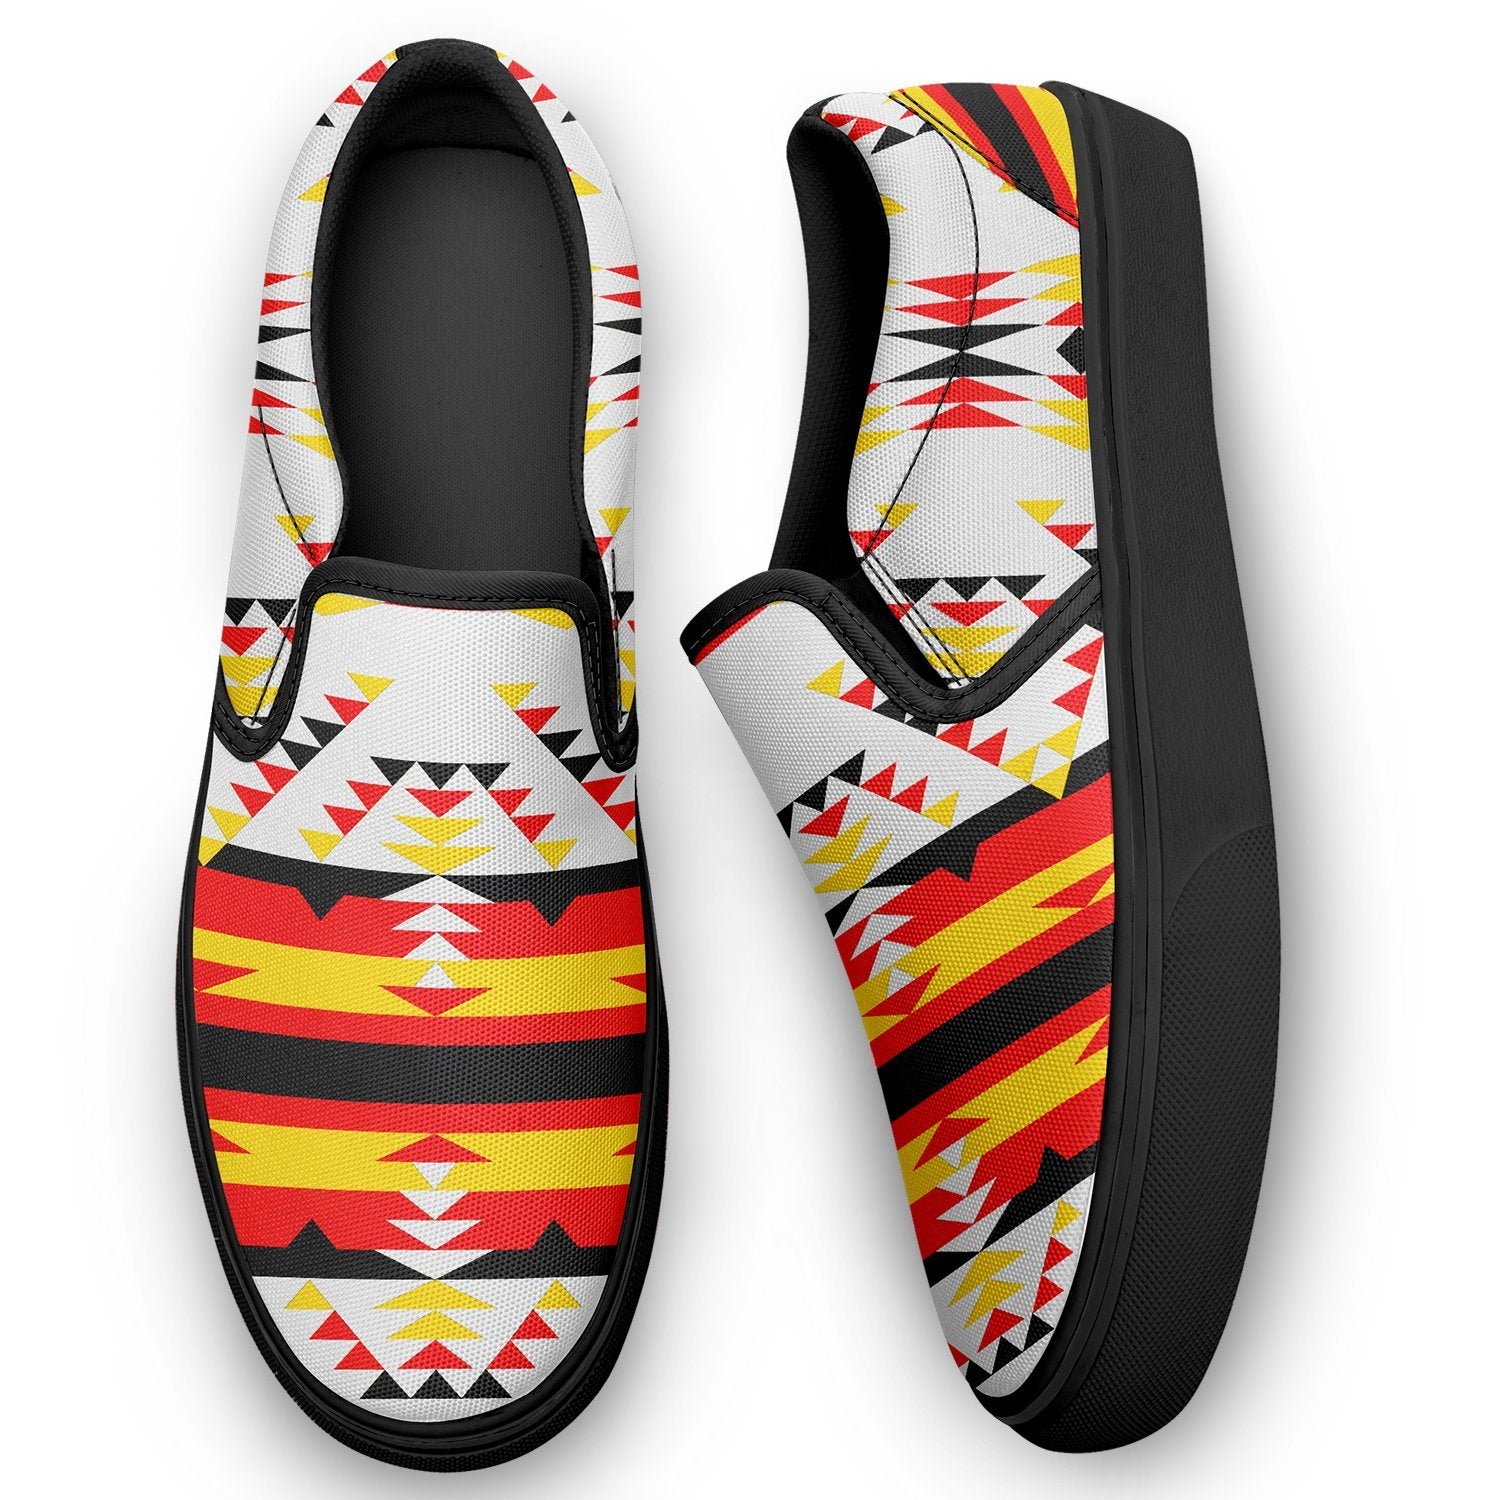 Visions of Peace Directions Otoyimm Canvas Slip On Shoes 49 Dzine 